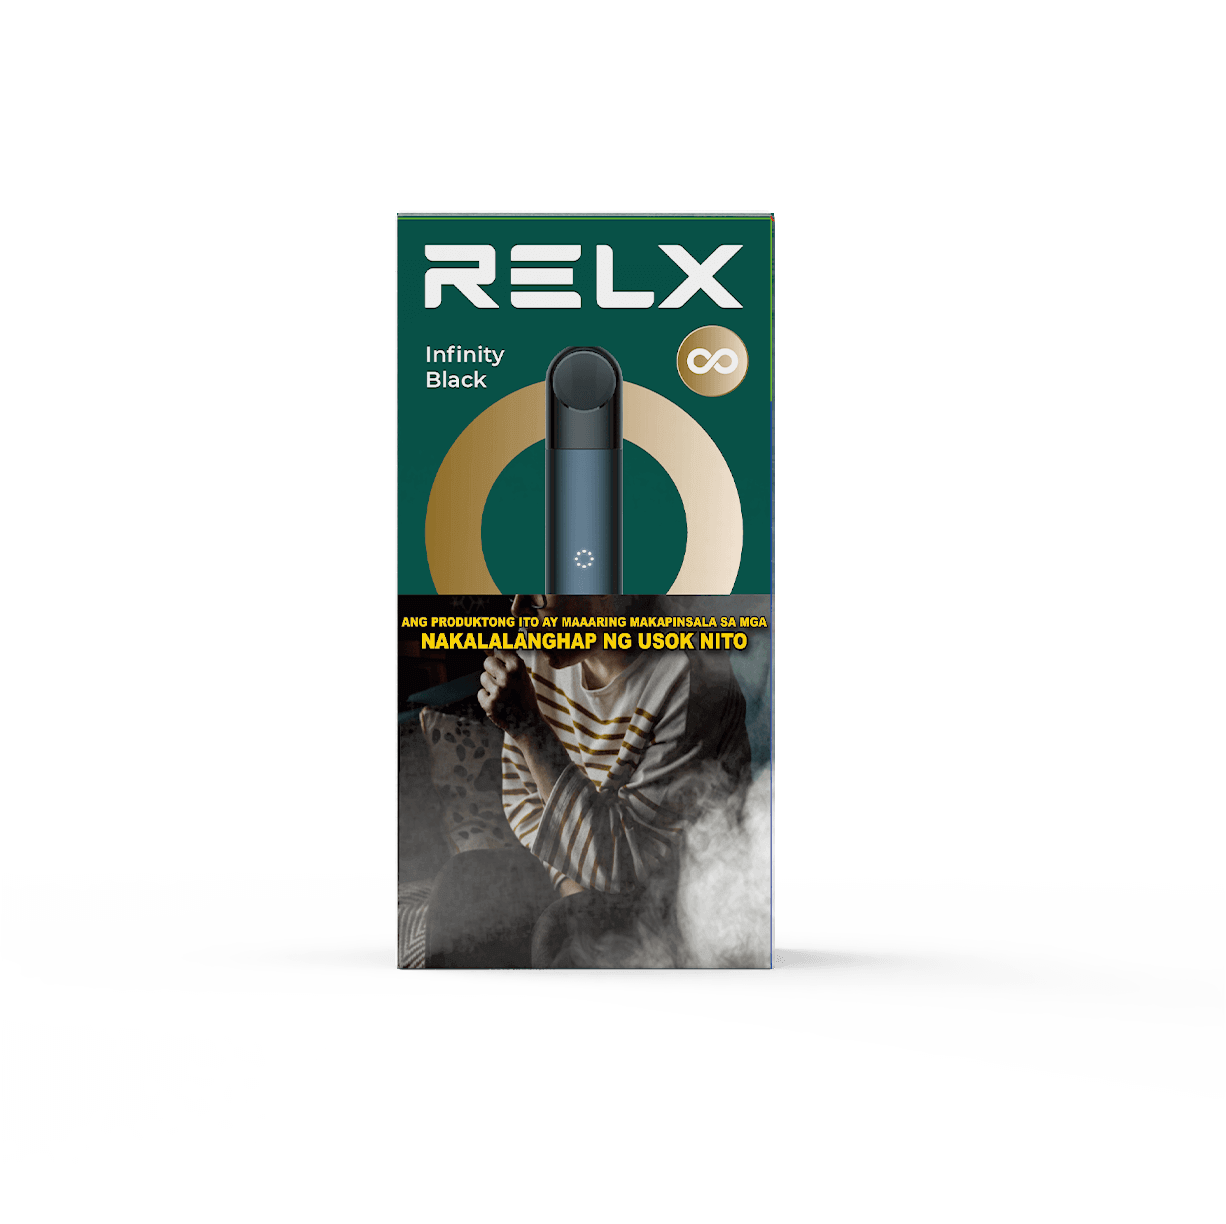 Relx Infinity Device - Black at ₱1149.00